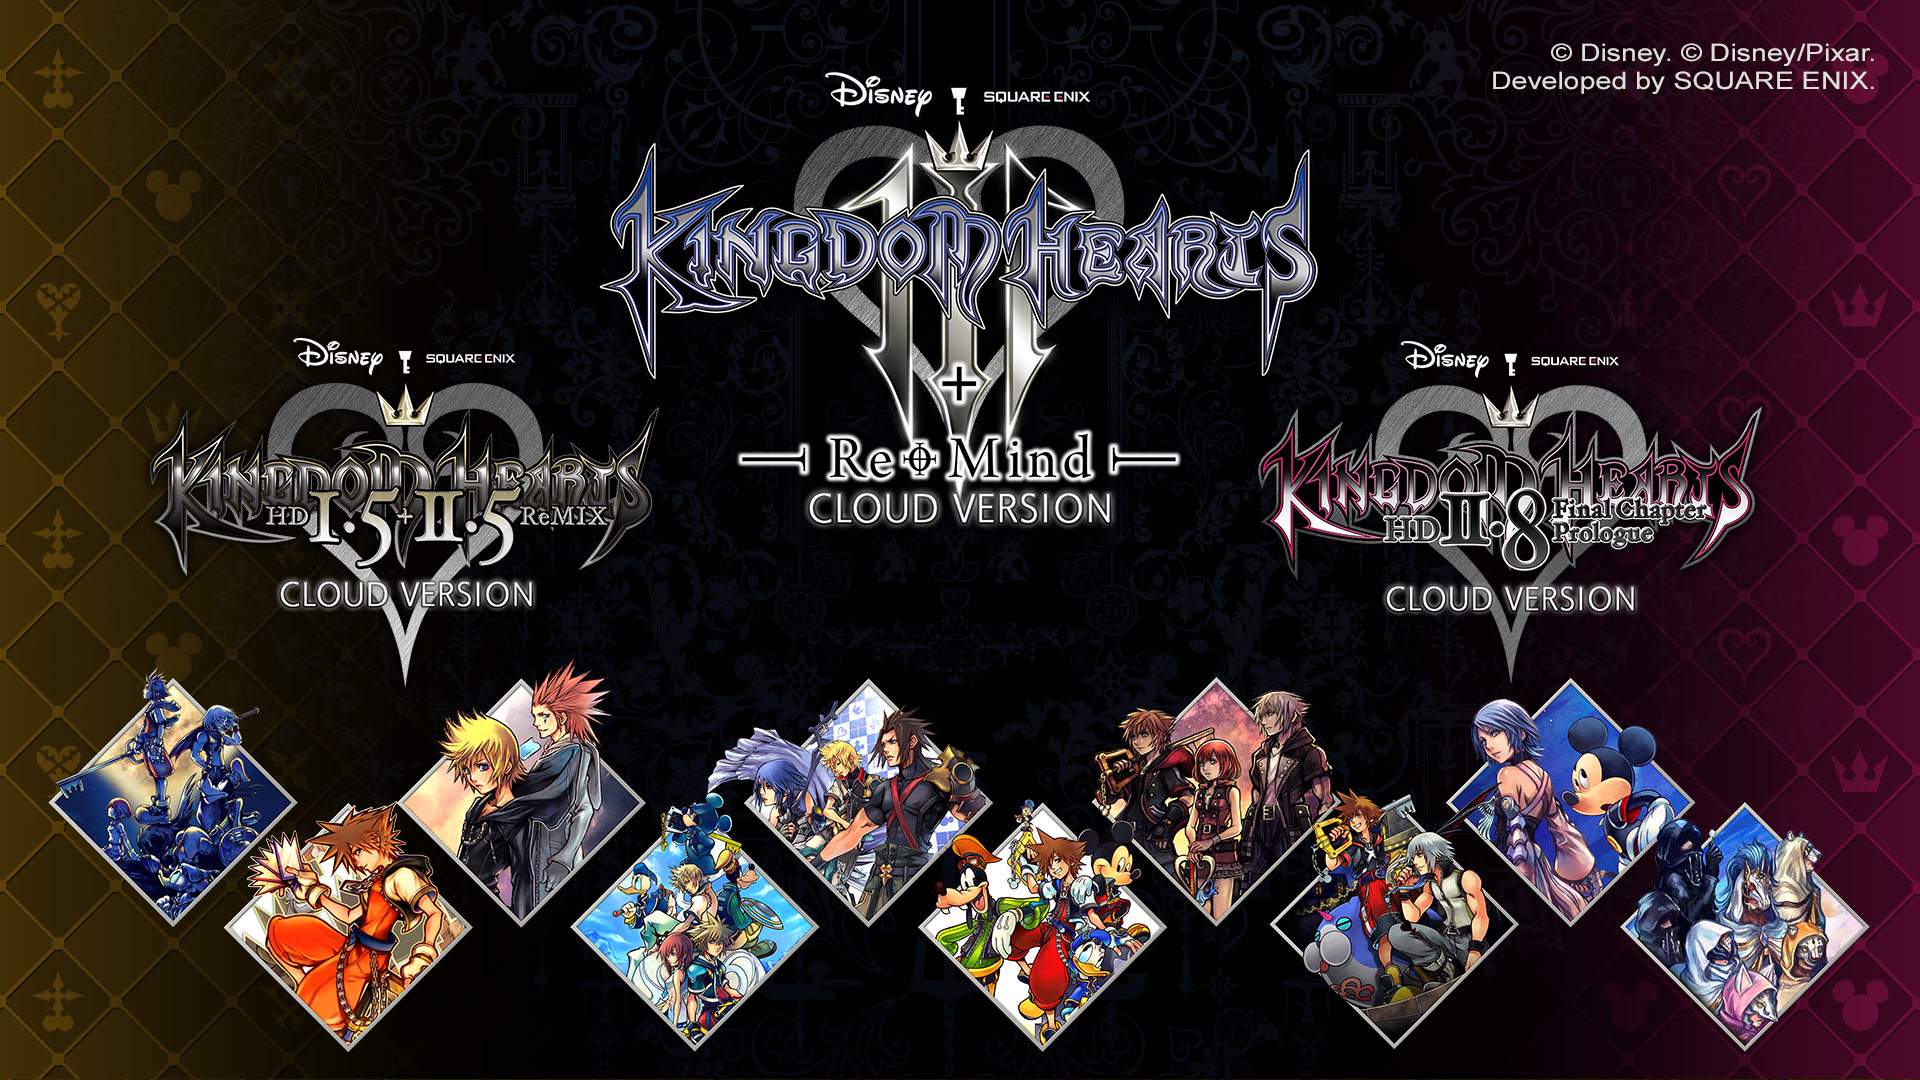 LOGOS FOR ALL THREE KINGDOM HEARTS TITLES FOR NINTENDO SWITCH FOR CLOUD & IN-GAME CHARACTERS